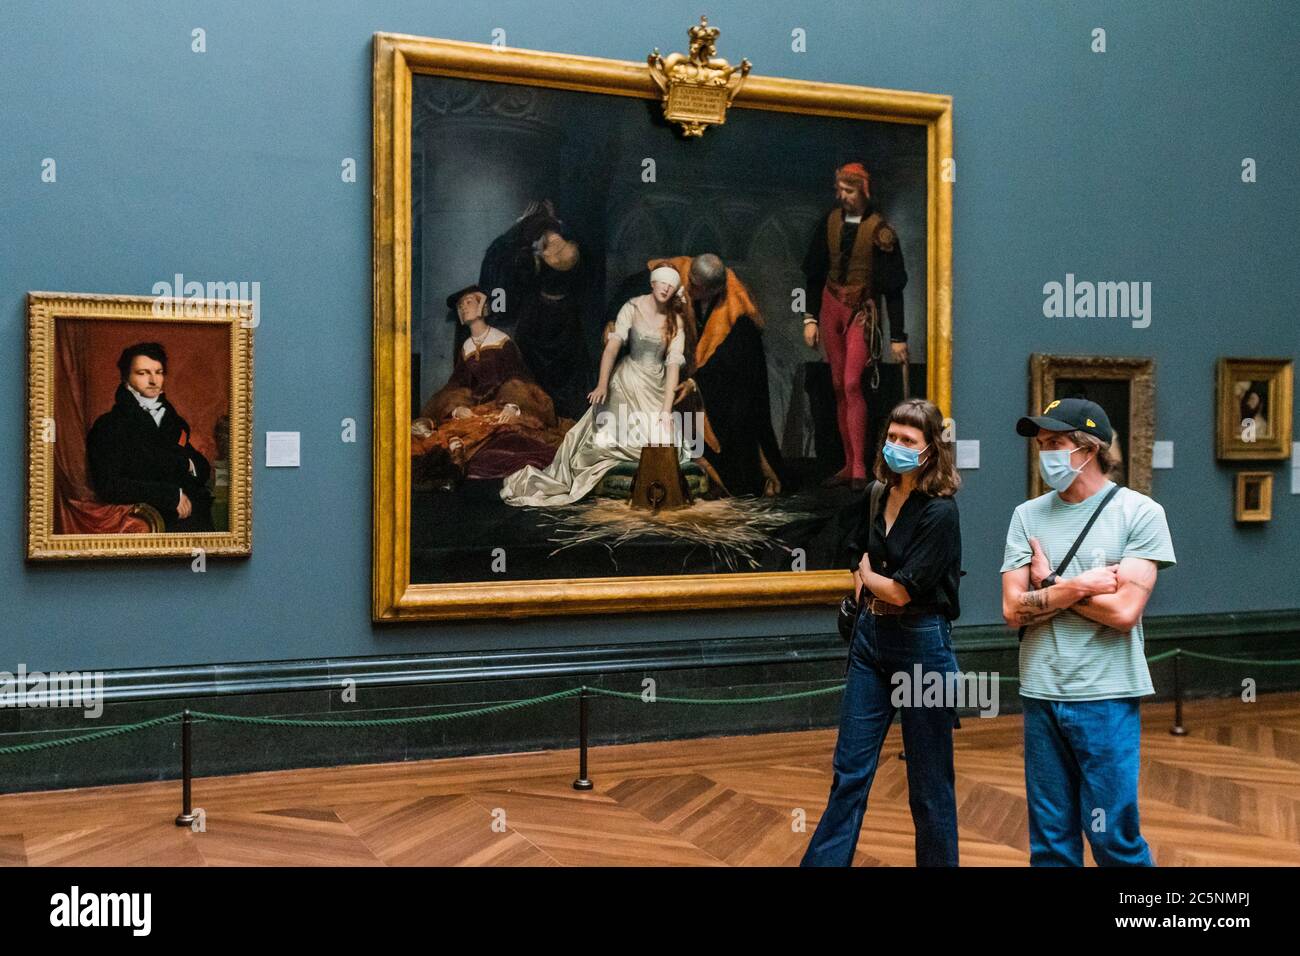 London, UK. 04th July, 2020. EMBARGOED TILL 1700 04/07/20 - The execution of Lady Jane Grey by Delaroche - The National Gallery is the first major public gallery to re-open, today offering a preview of the social distancing, one way system and other precautions - with the official public opening, with timed entry, next Wednesday. The 'lockdown' continues for the Coronavirus (Covid 19) outbreak in London. Credit: Guy Bell/Alamy Live News Stock Photo